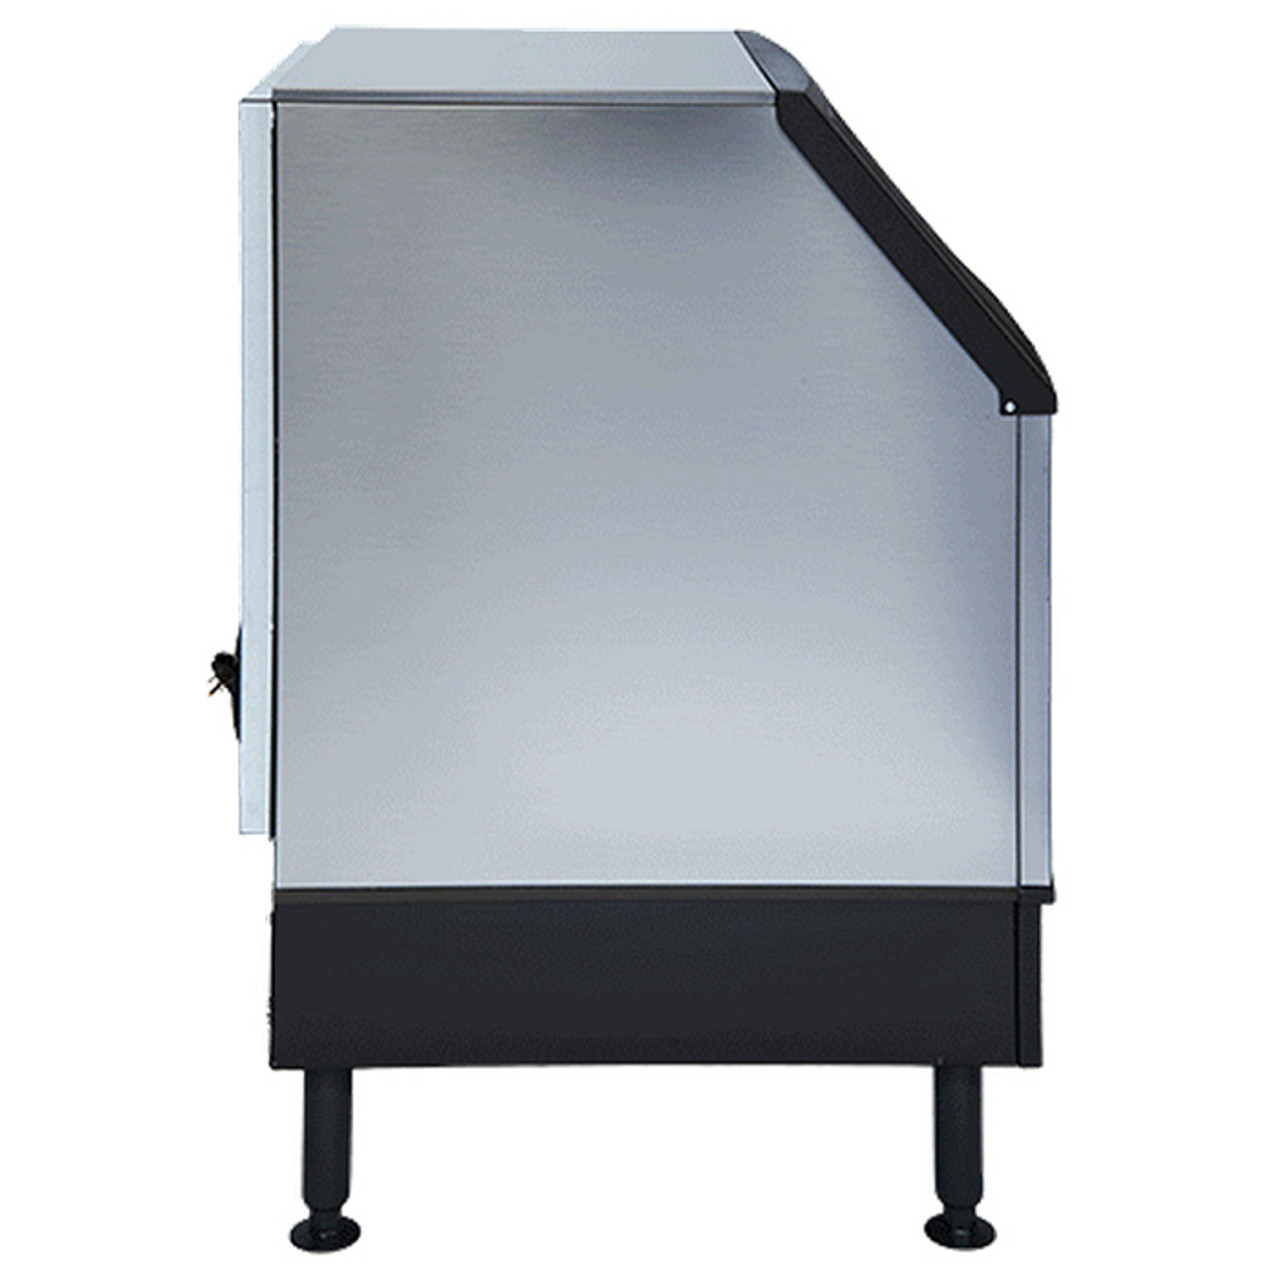 Saf-T-Scoop® & Guardian™ System for Ice Machines